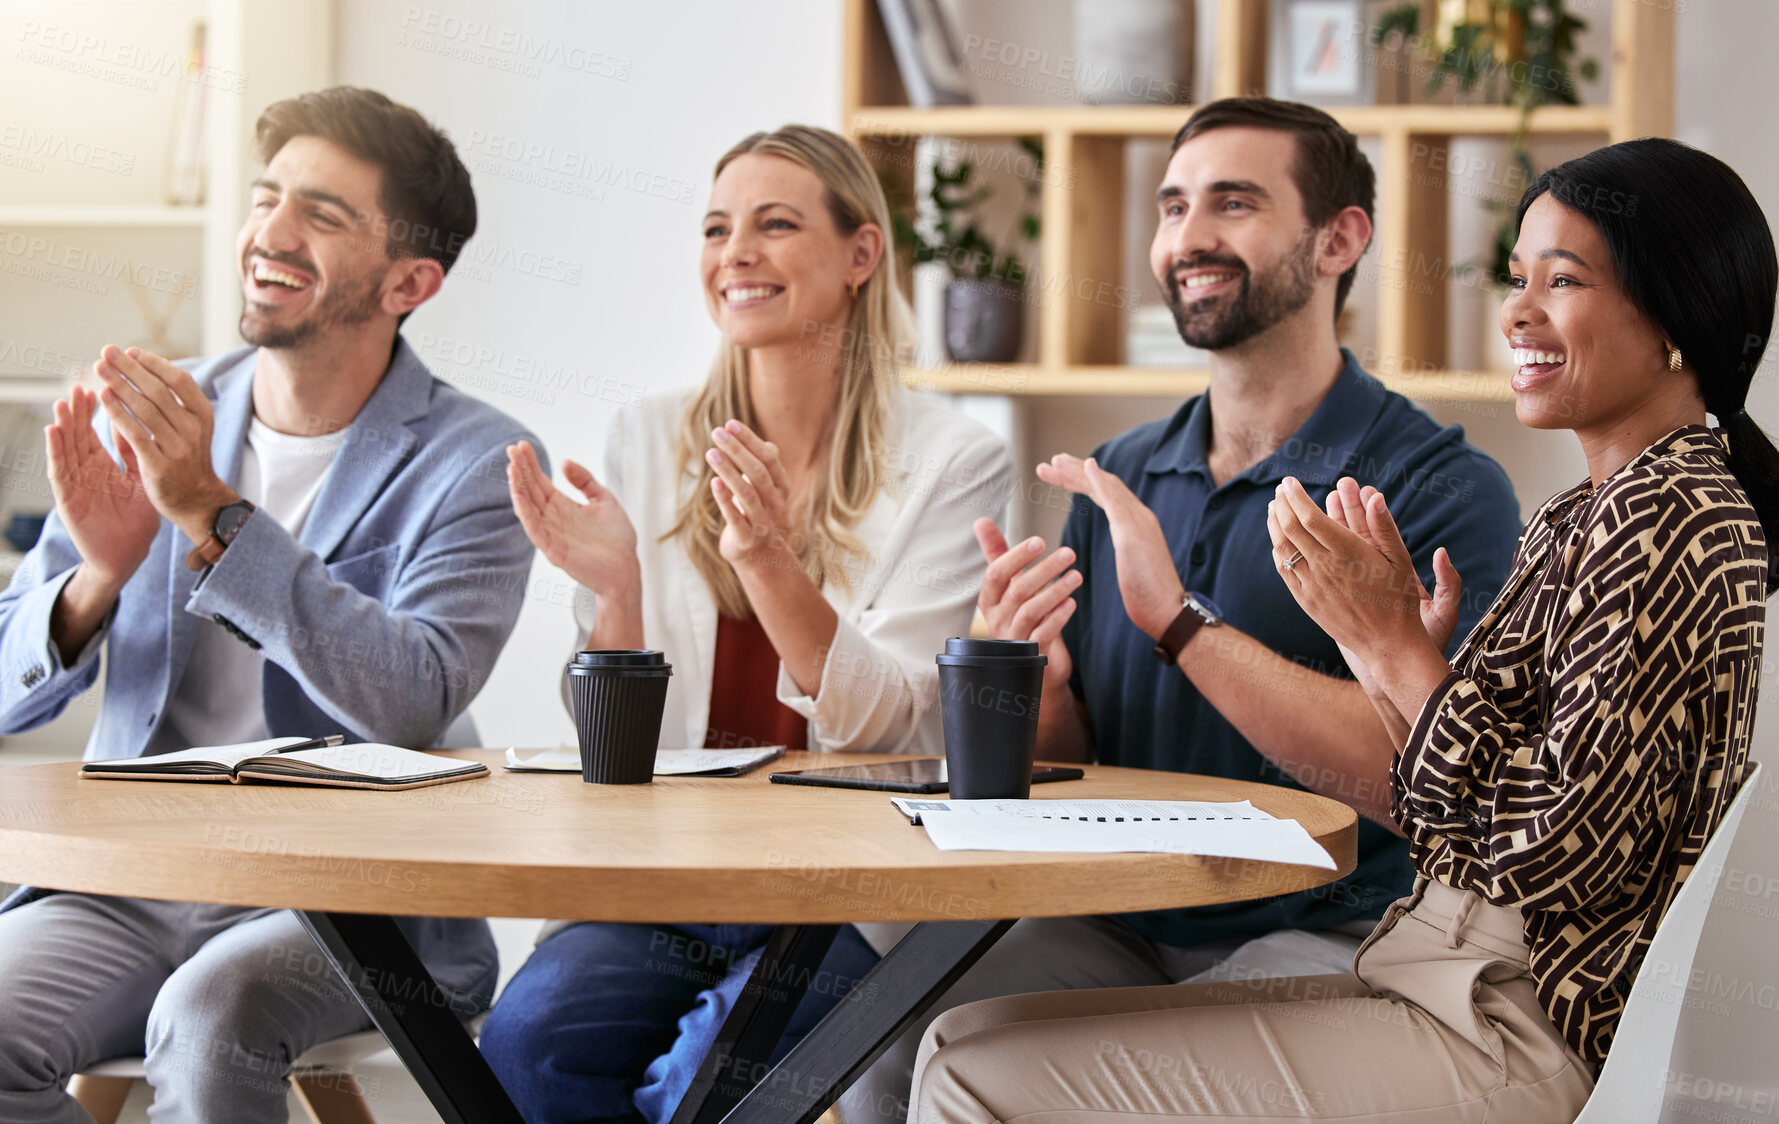 Buy stock photo Applause, success and celebrating business people in a meeting clapping hands for company growth. Happy team of employee excited and in support of a successful strategy due to teamwork